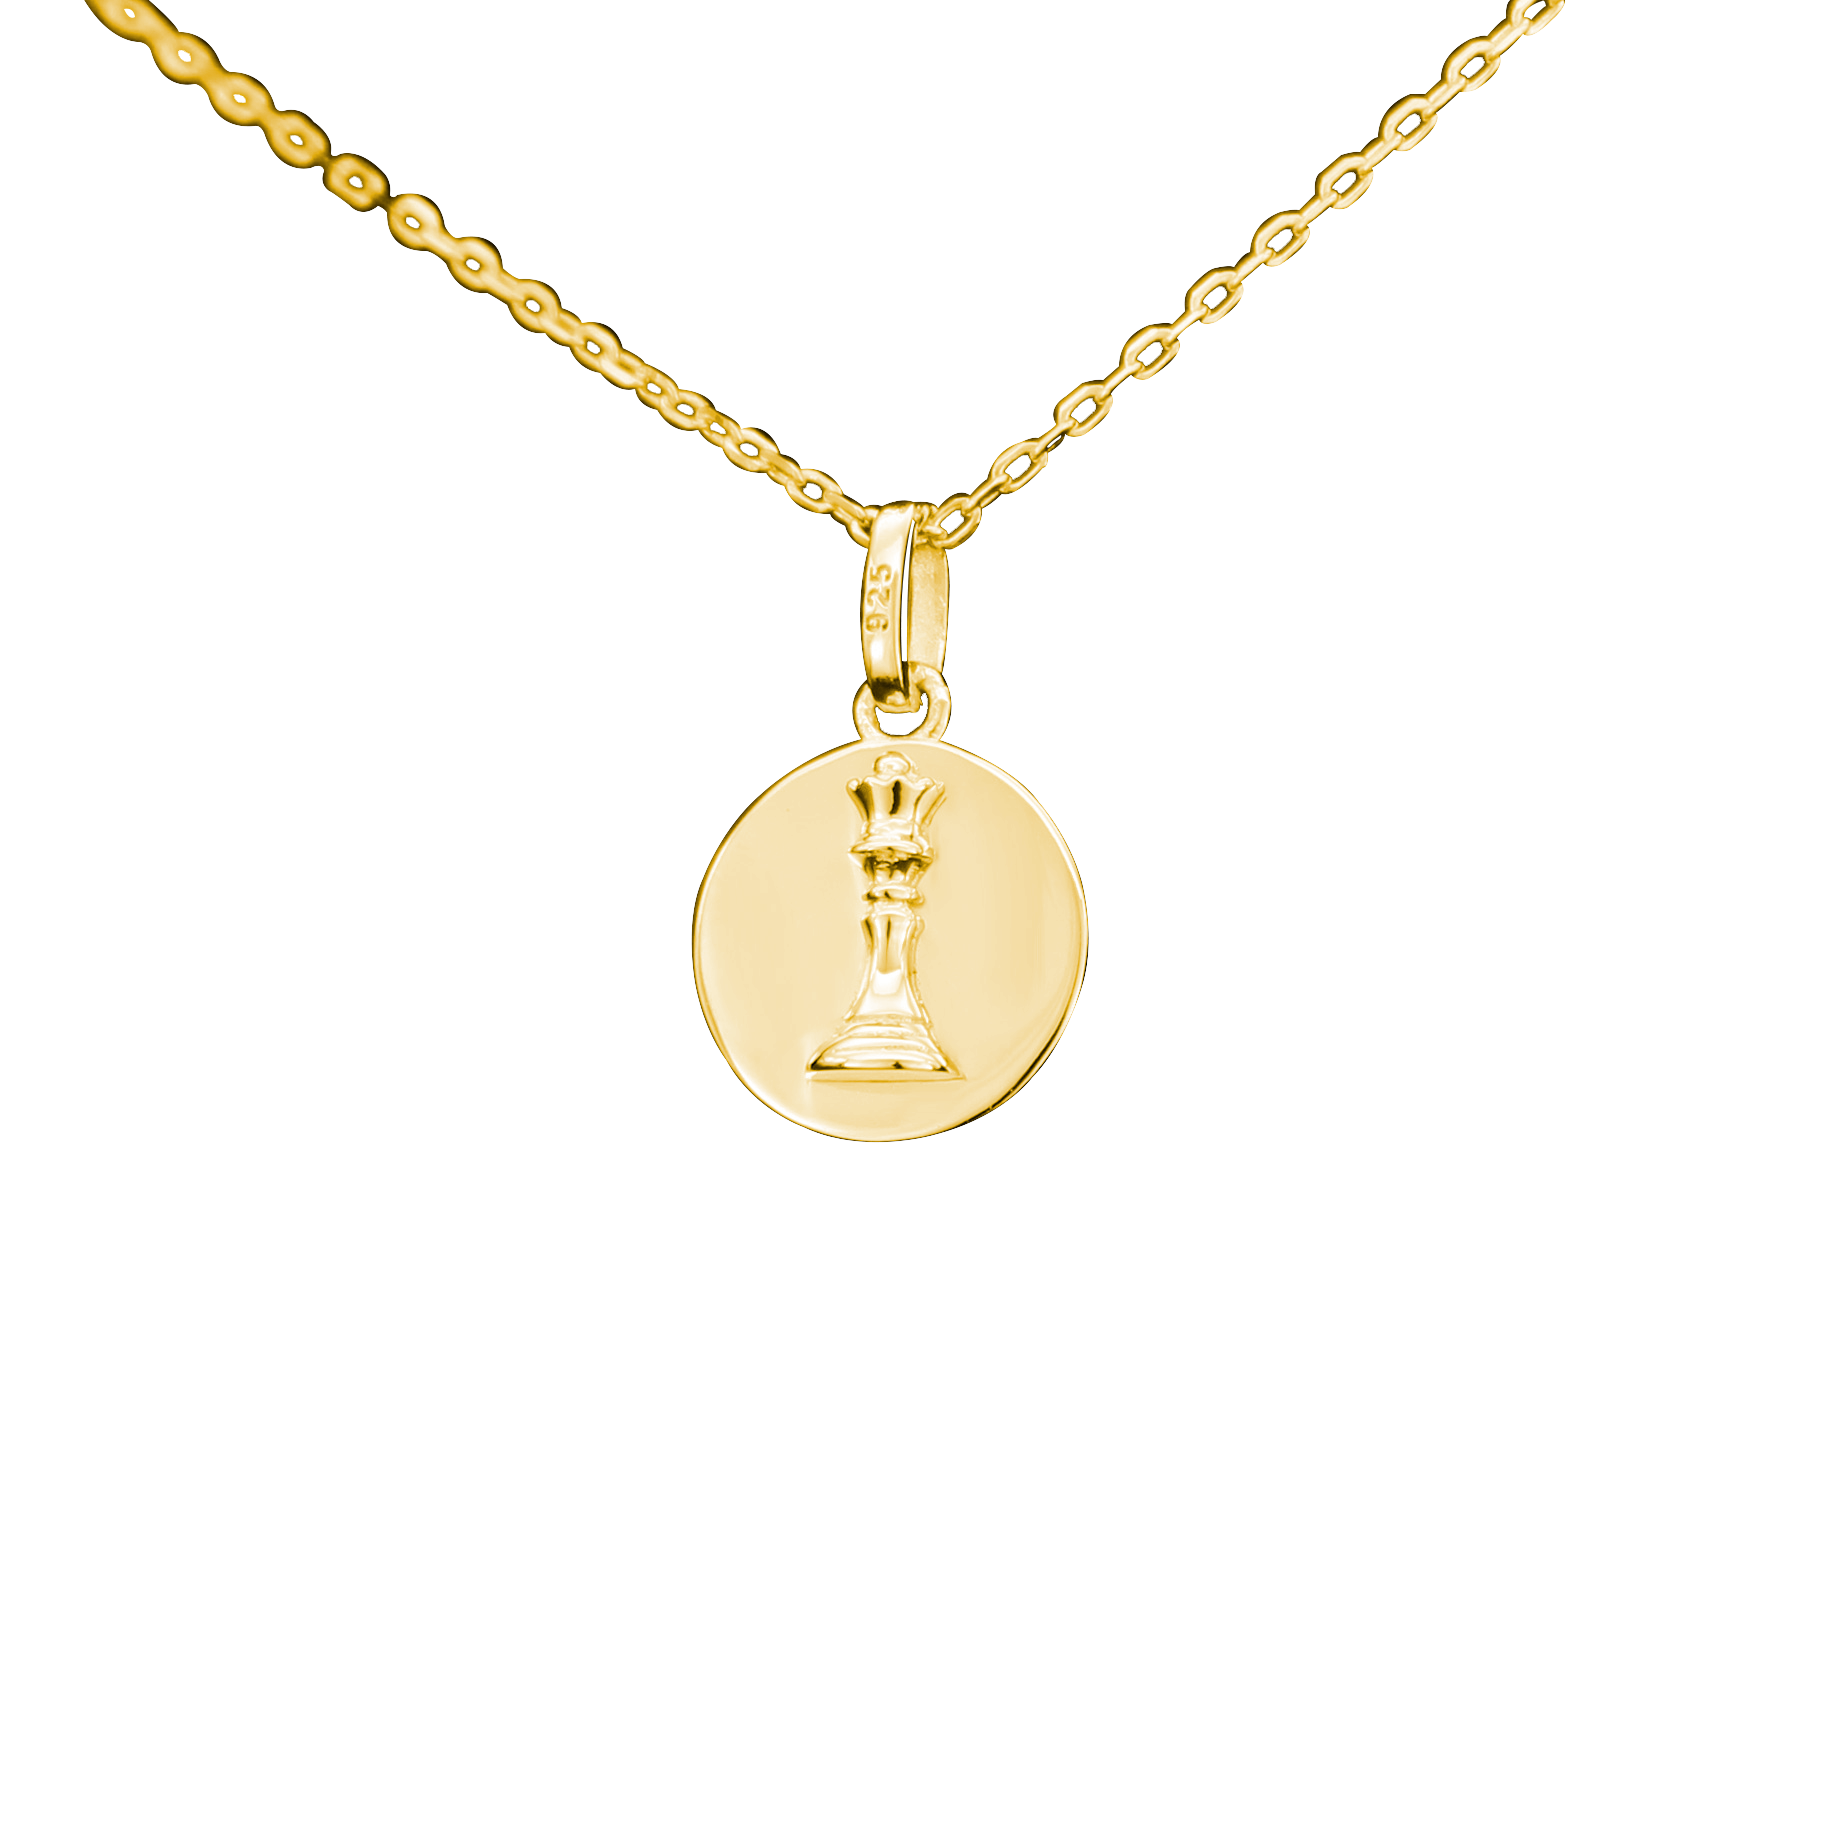 Signature Queen Coin Necklace, Gold - Bella Mayford